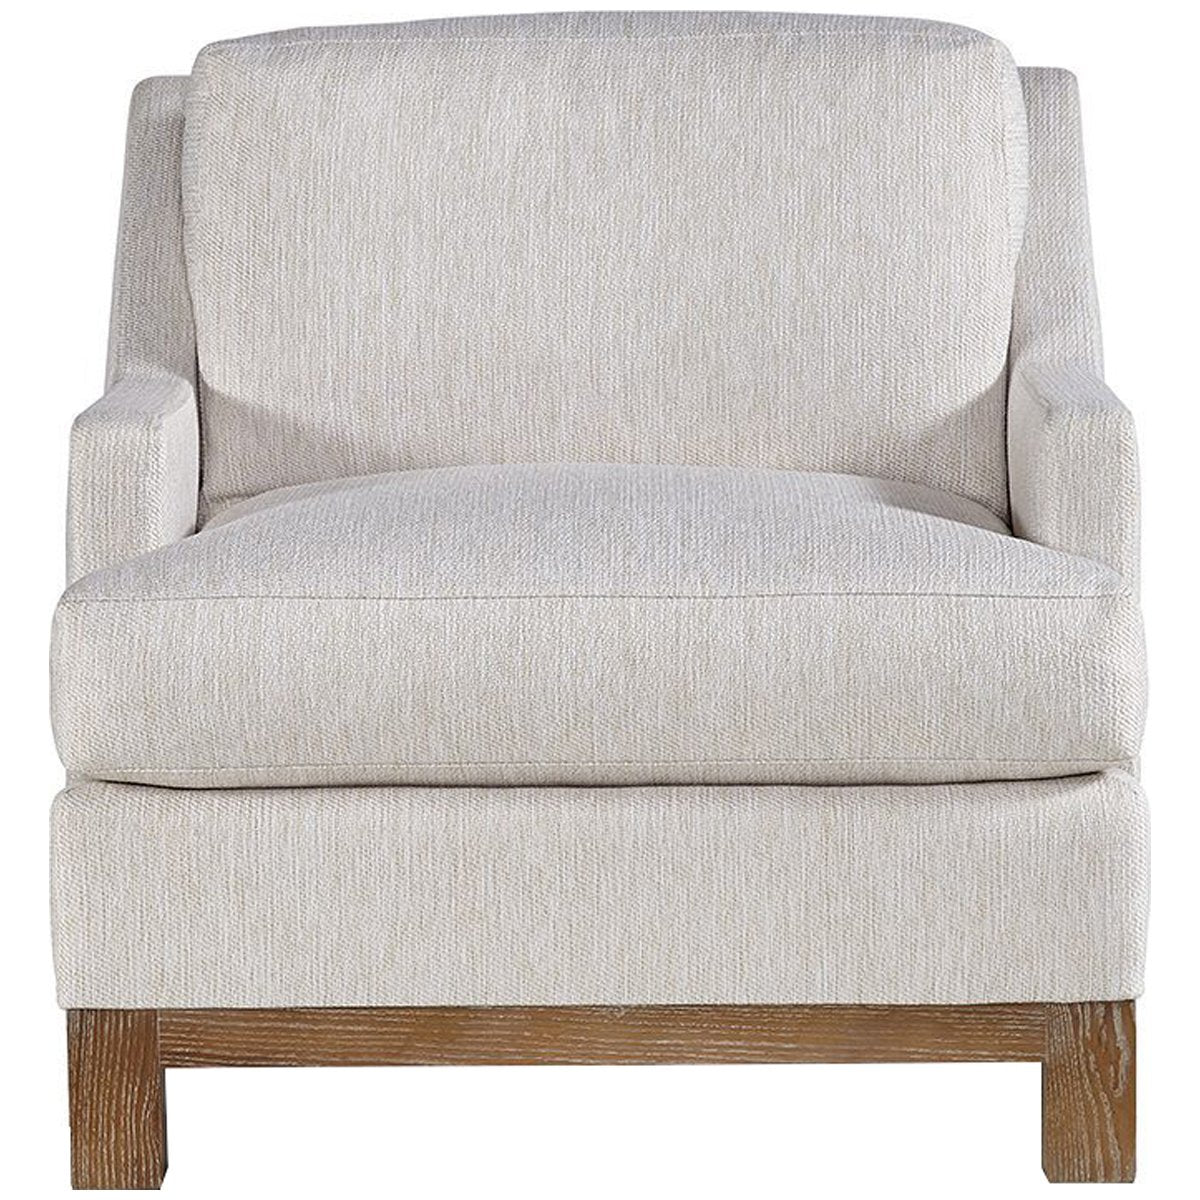 Hickory White Patron River Rock Chair